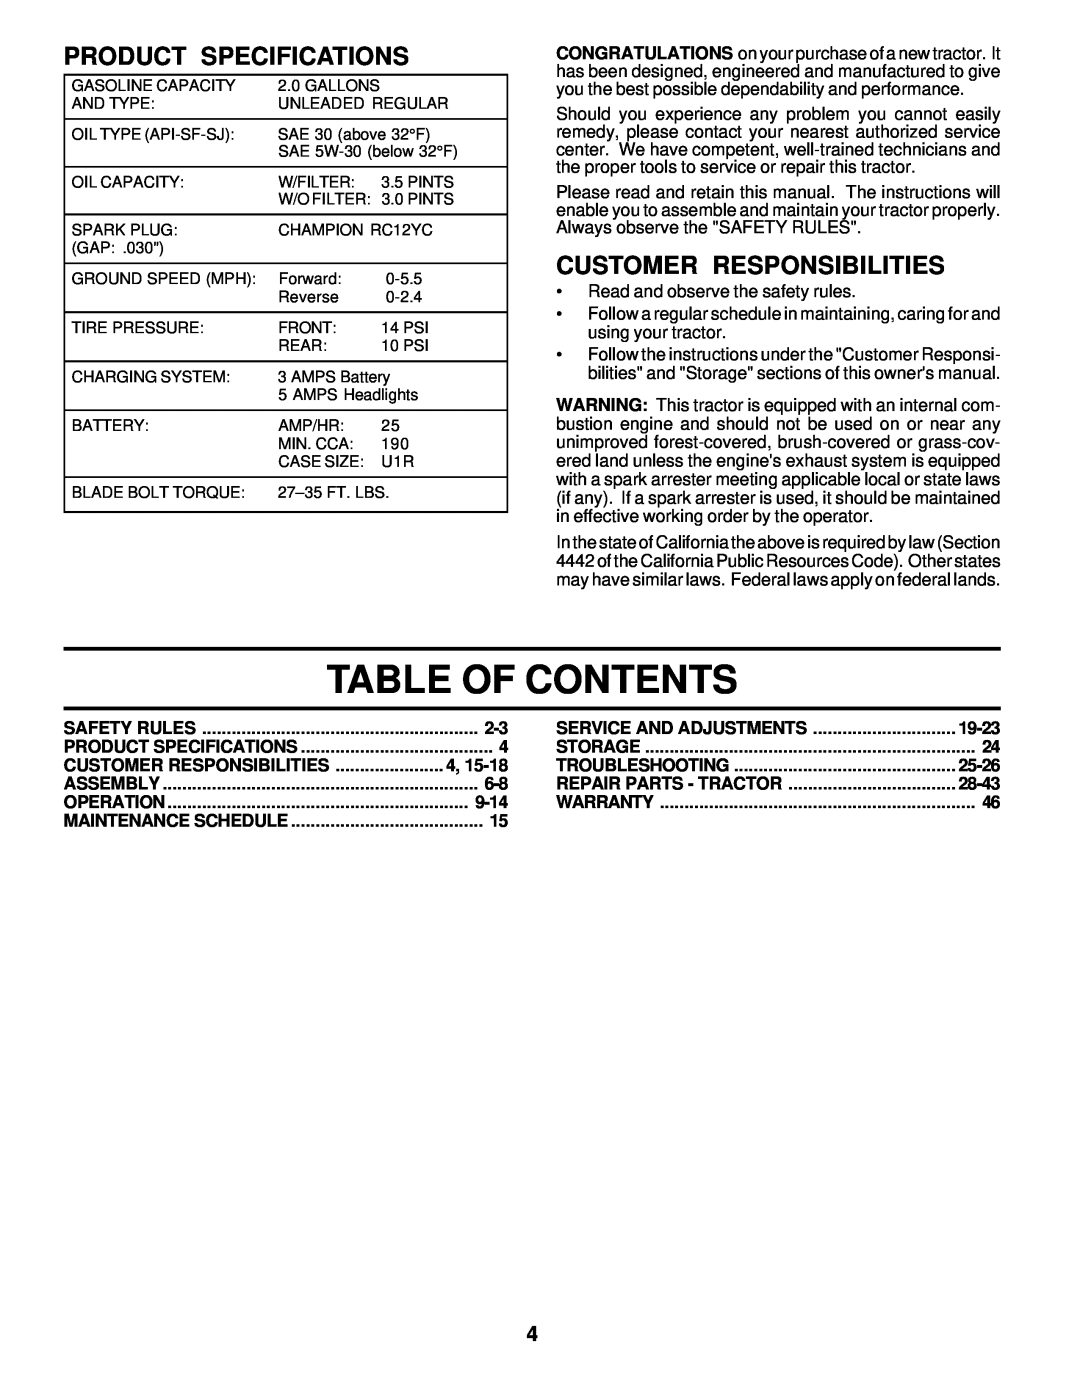 Poulan 177029 owner manual Table Of Contents, Product Specifications, Customer Responsibilities 